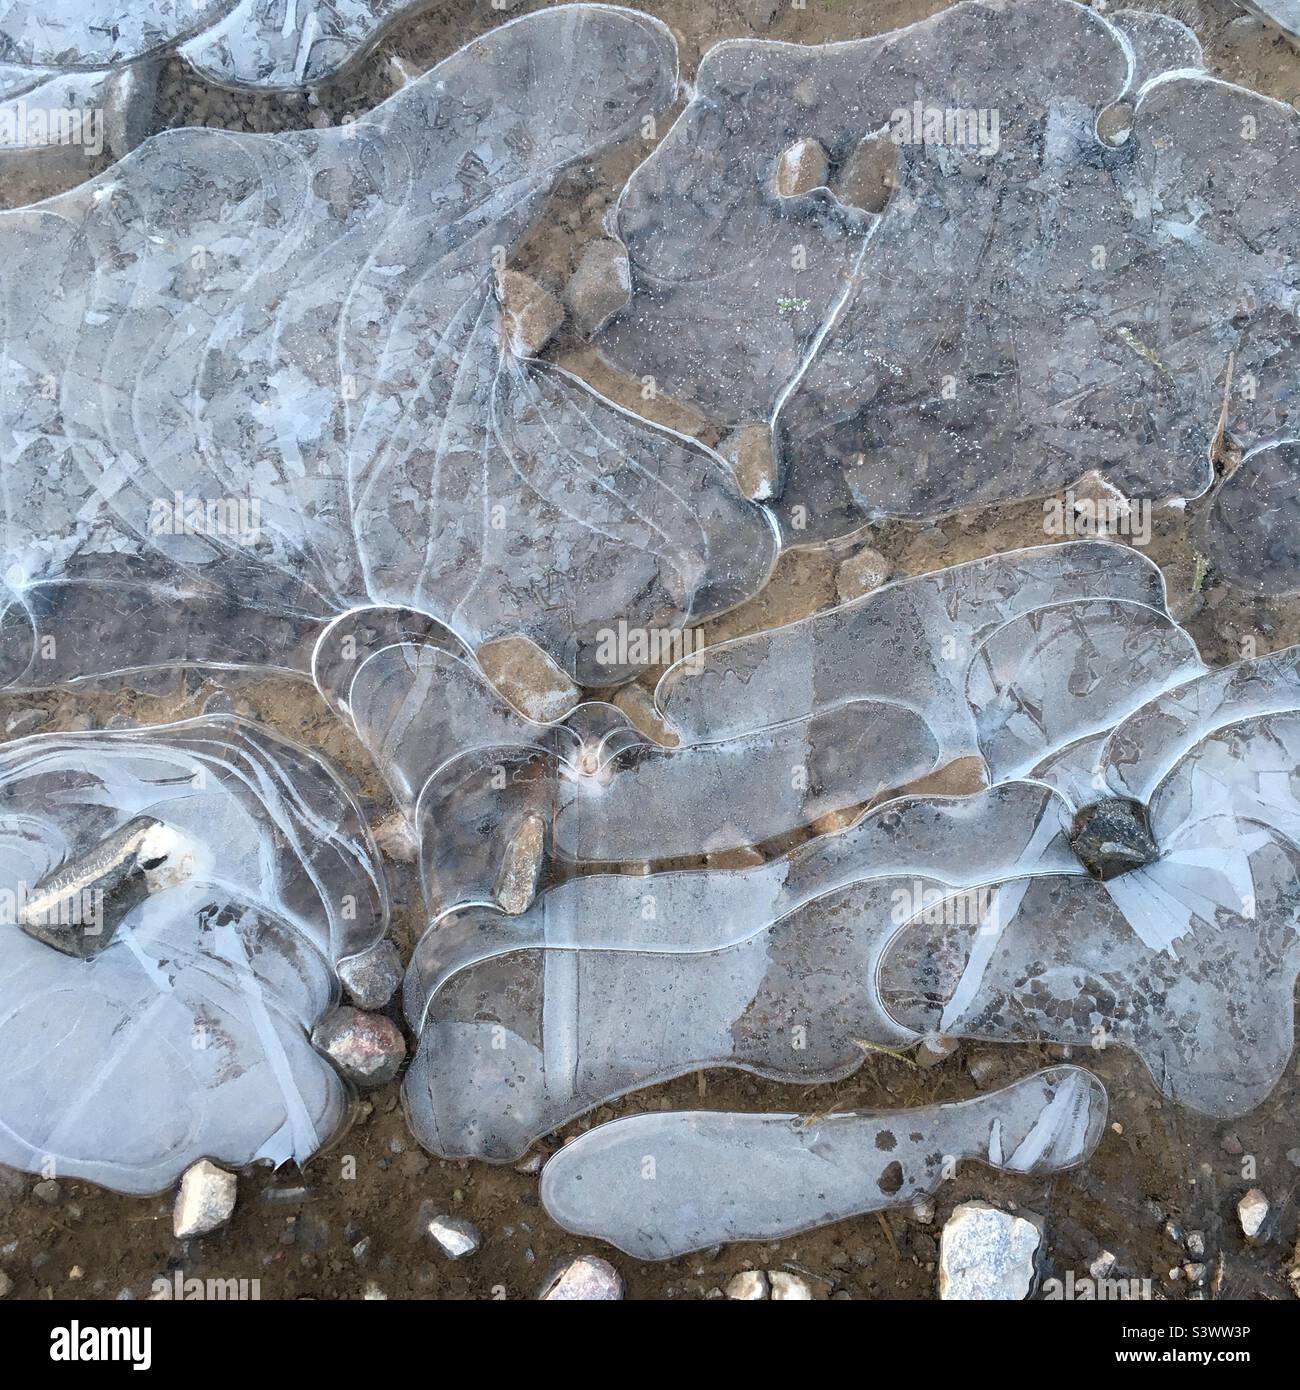 A sinuous pattern made by pebbles in a frozen puddle Stock Photo